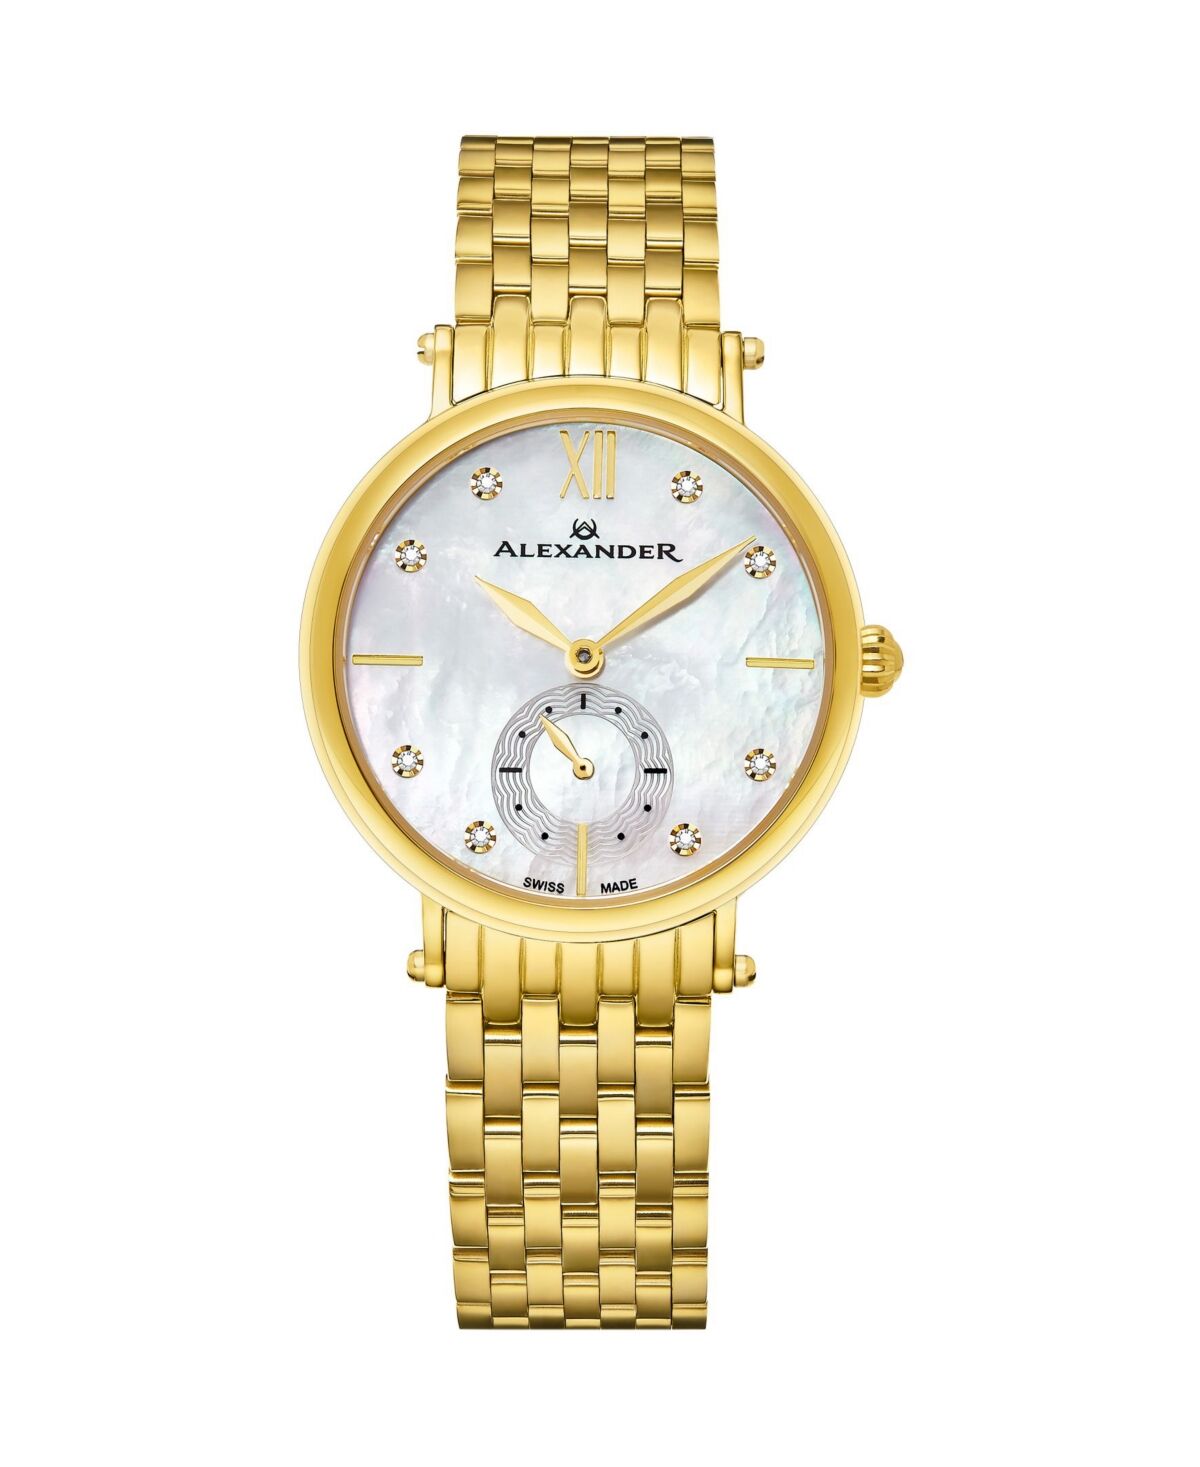 Stuhrling Alexander Watch AD201B-02, Ladies Quartz Small-Second Watch with Yellow Gold Tone Stainless Steel Case on Yellow Gold Tone Stainless Steel Bracelet -